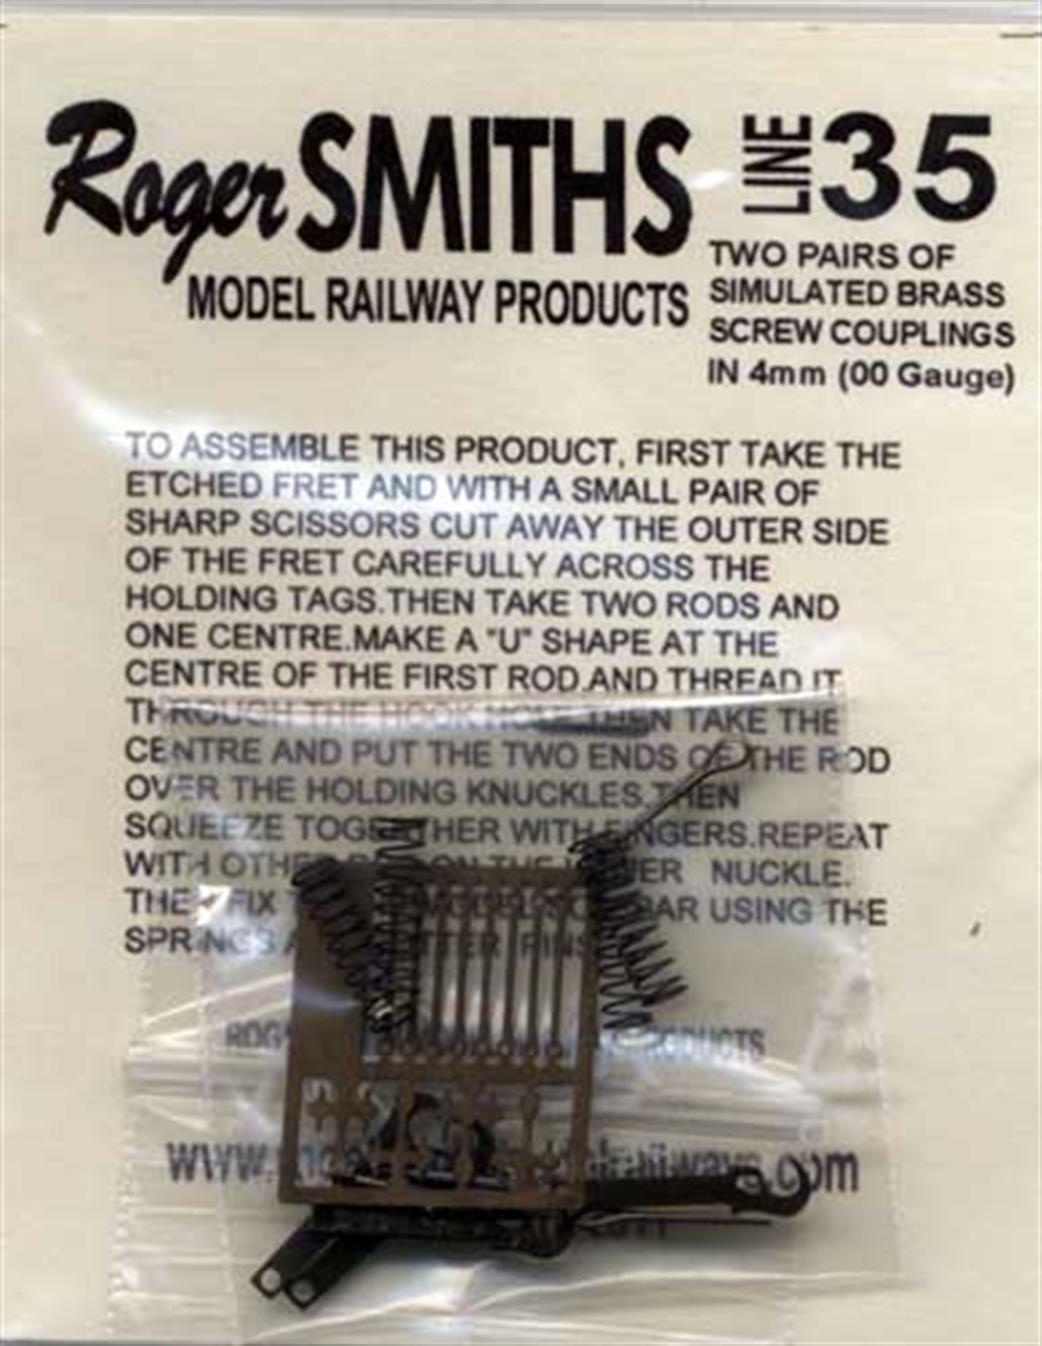 Roger Smith OO LINE35 Two pairs of simulated brass screw couplings